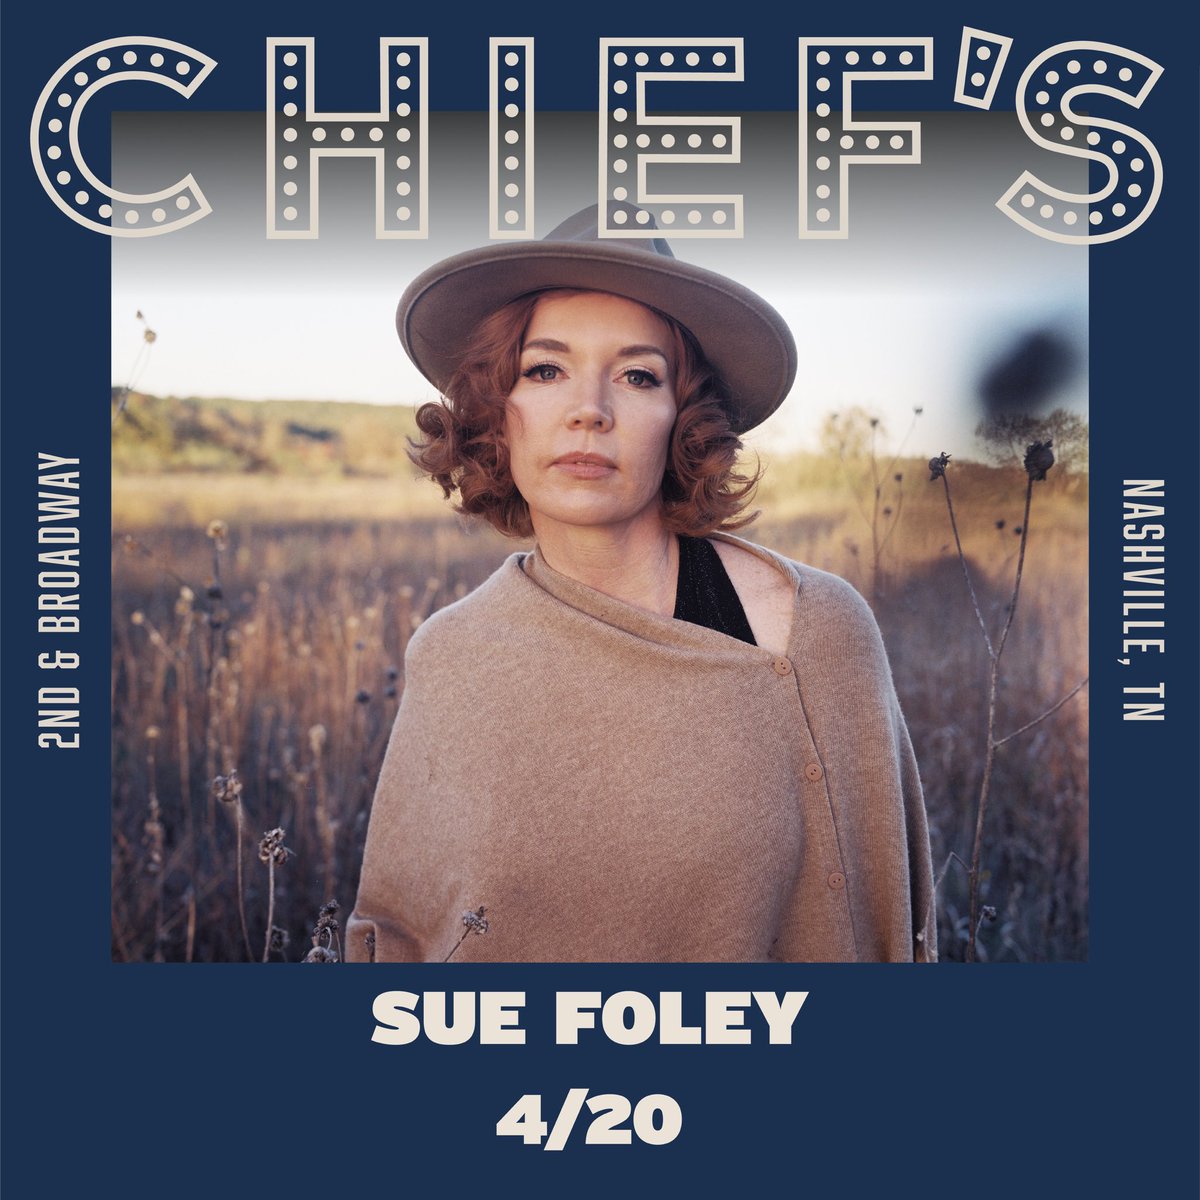 Get ready for a double dose of greatness at Chief’s this week! Sue Foley and Driver Williams are set to light up the stage with their incredible performances. Don’t miss out! 🔥 Grab your tickets now - link in bio! #LiveMusic #SueFoley #DriverWilliams #ChiefsOnBroadway